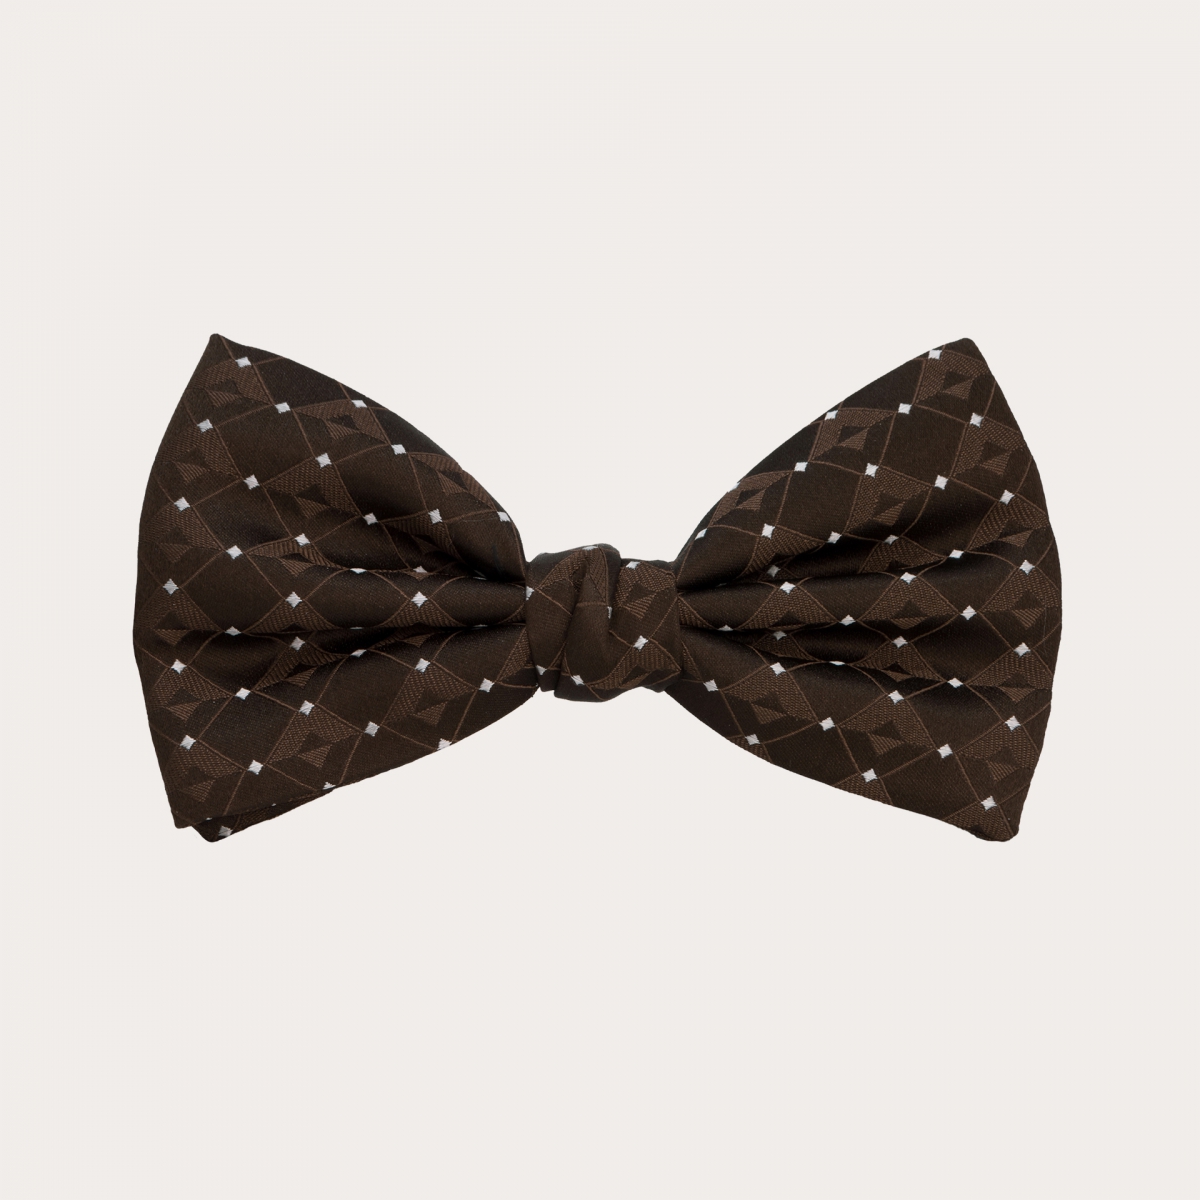 BRUCLE Refined white dots bow tie with brown tone-on-tone geometric pattern